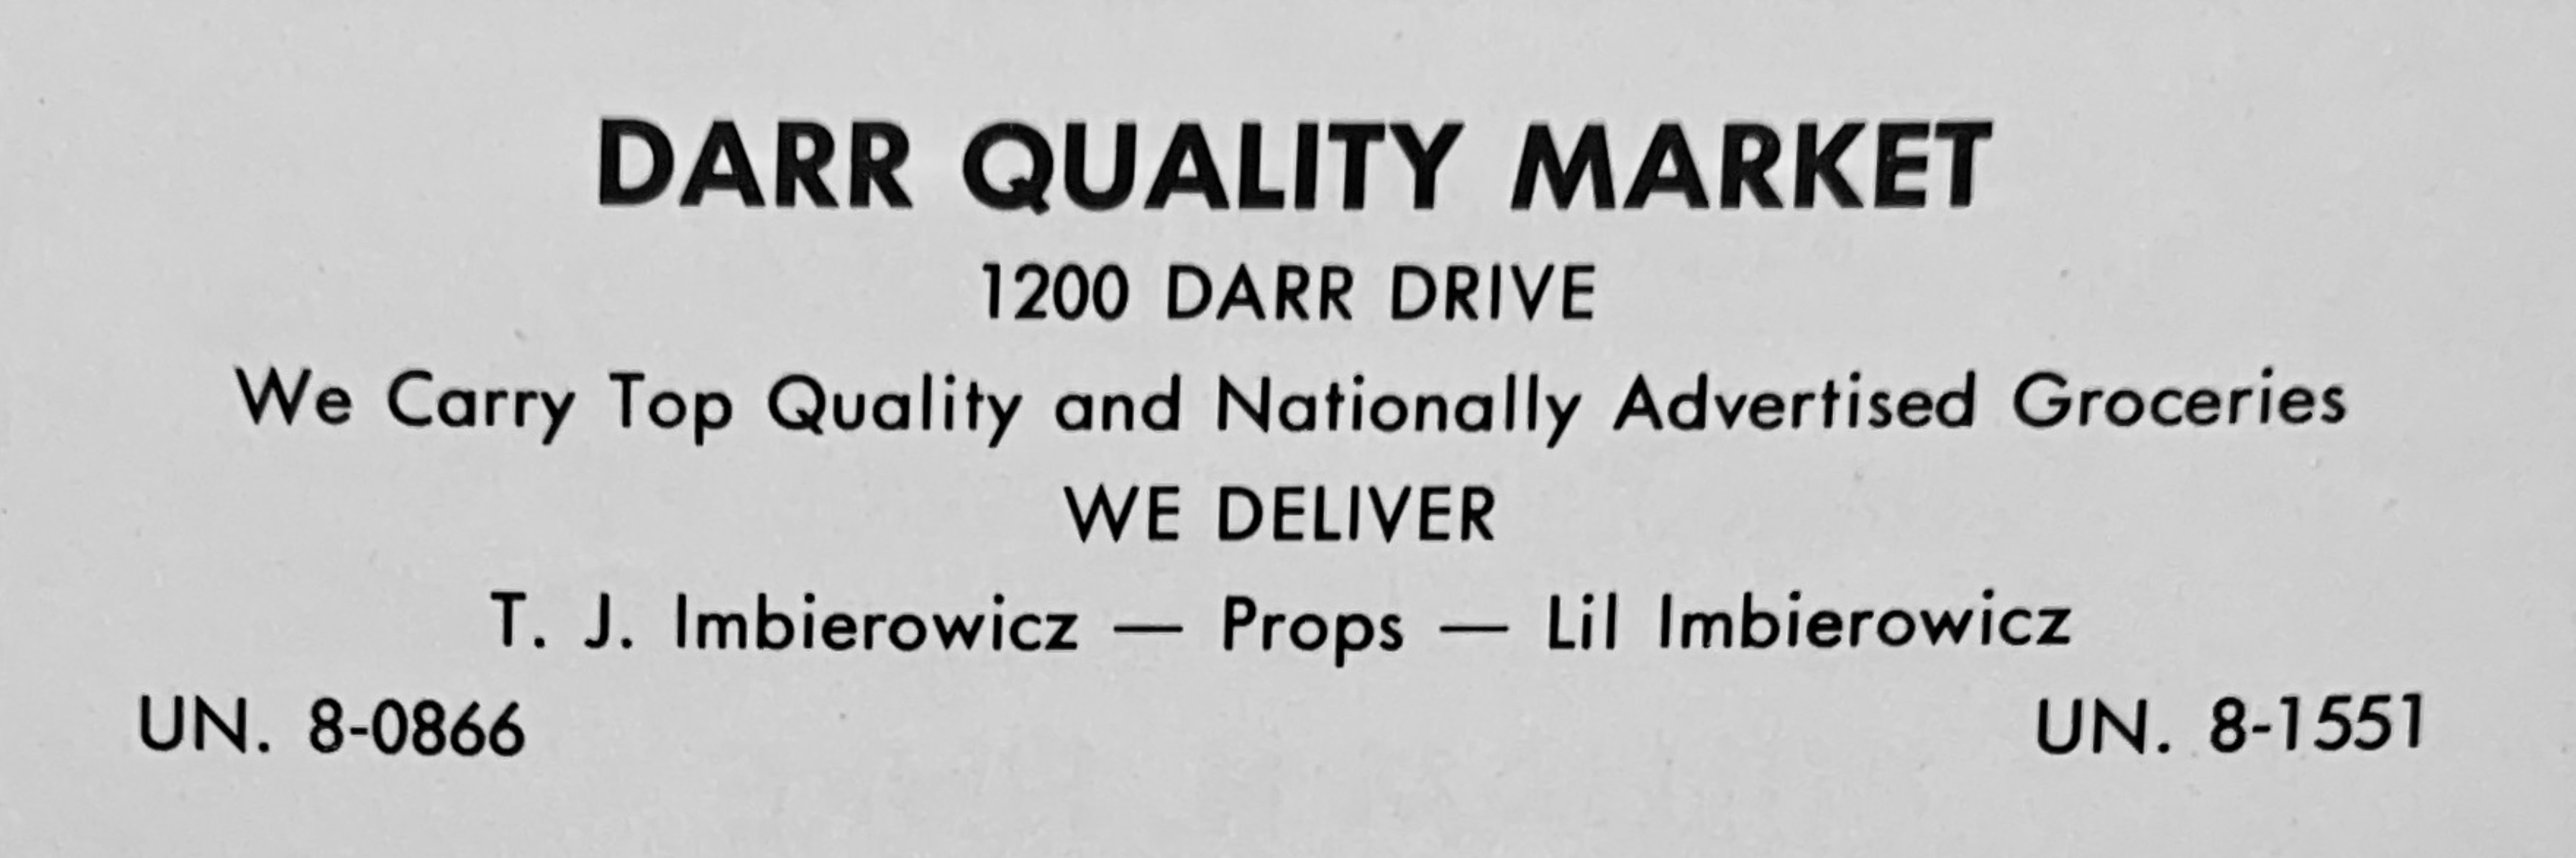 Ad for Darr Quality Market. ECHOES 1959